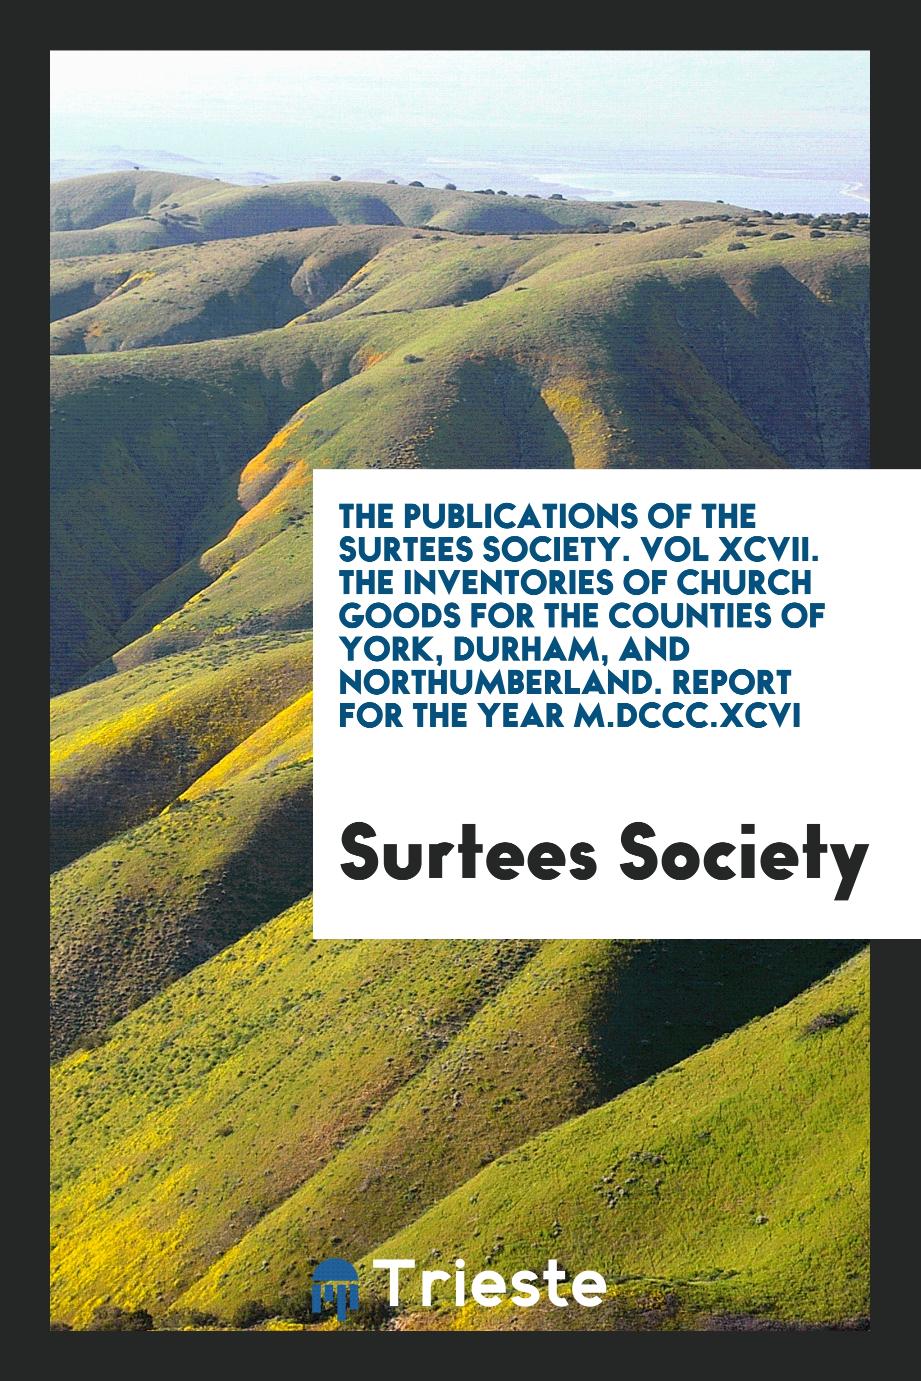 The Publications of the Surtees Society. Vol XCVII. The Inventories of Church Goods for the Counties of York, Durham, and Northumberland. Report for the Year M.DCCC.XCVI